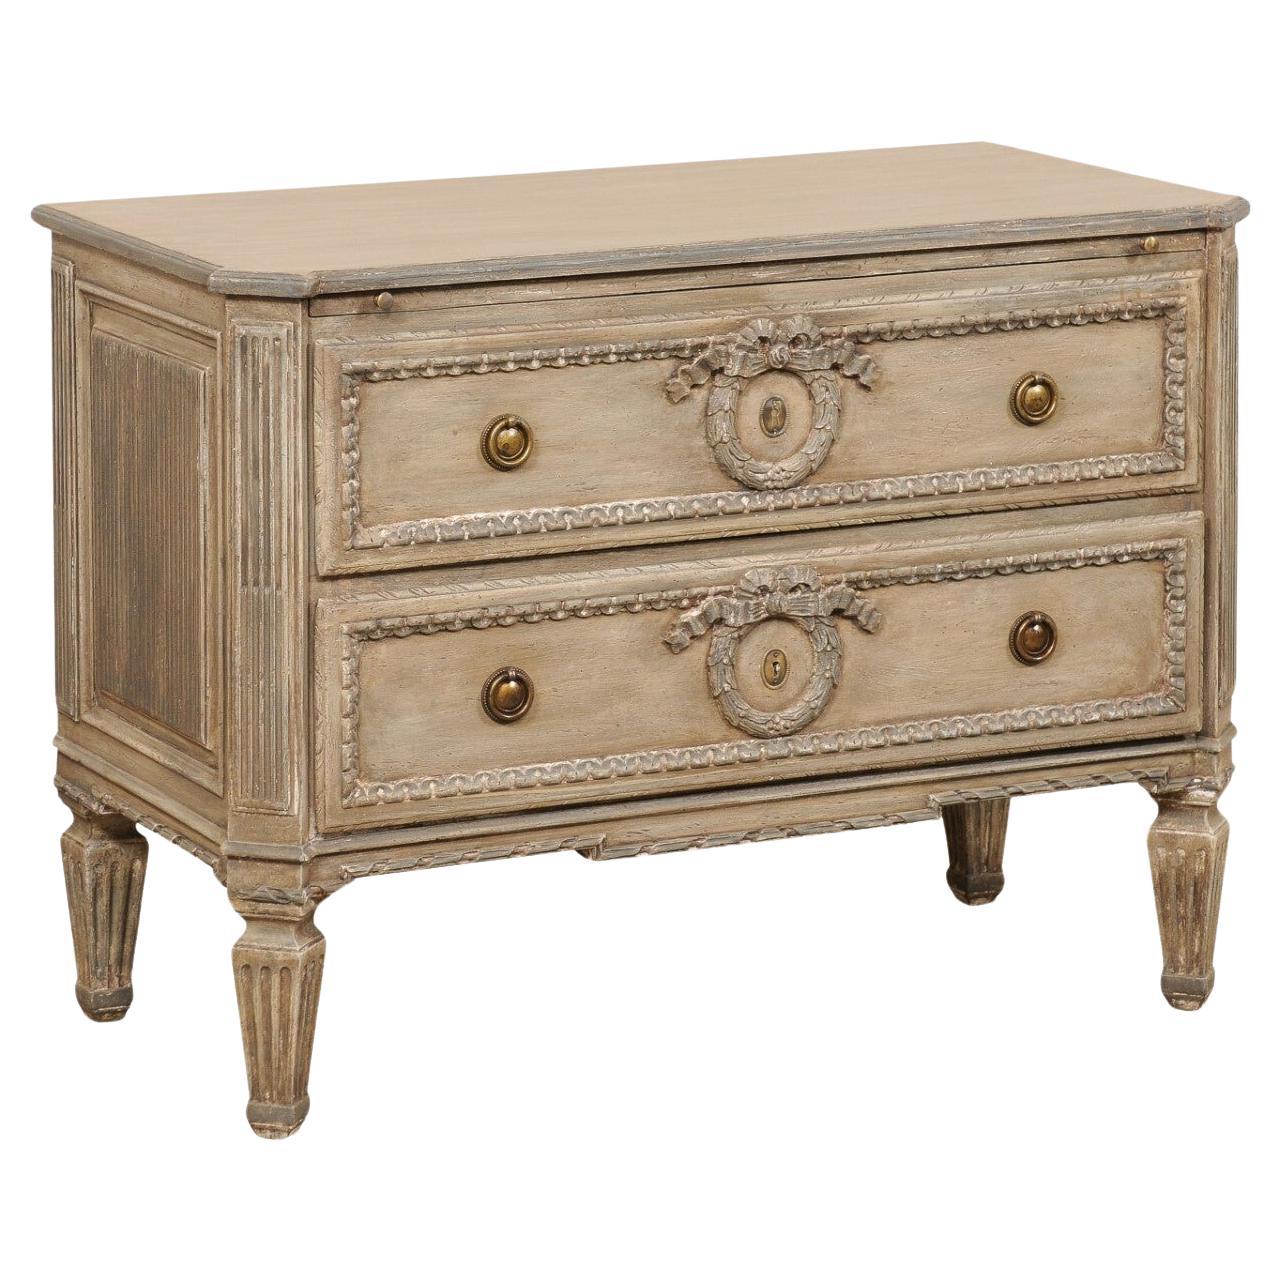 Italian Neoclassic Style Two-Drawer Chest w/Fluted and Wreath Carved Accents For Sale